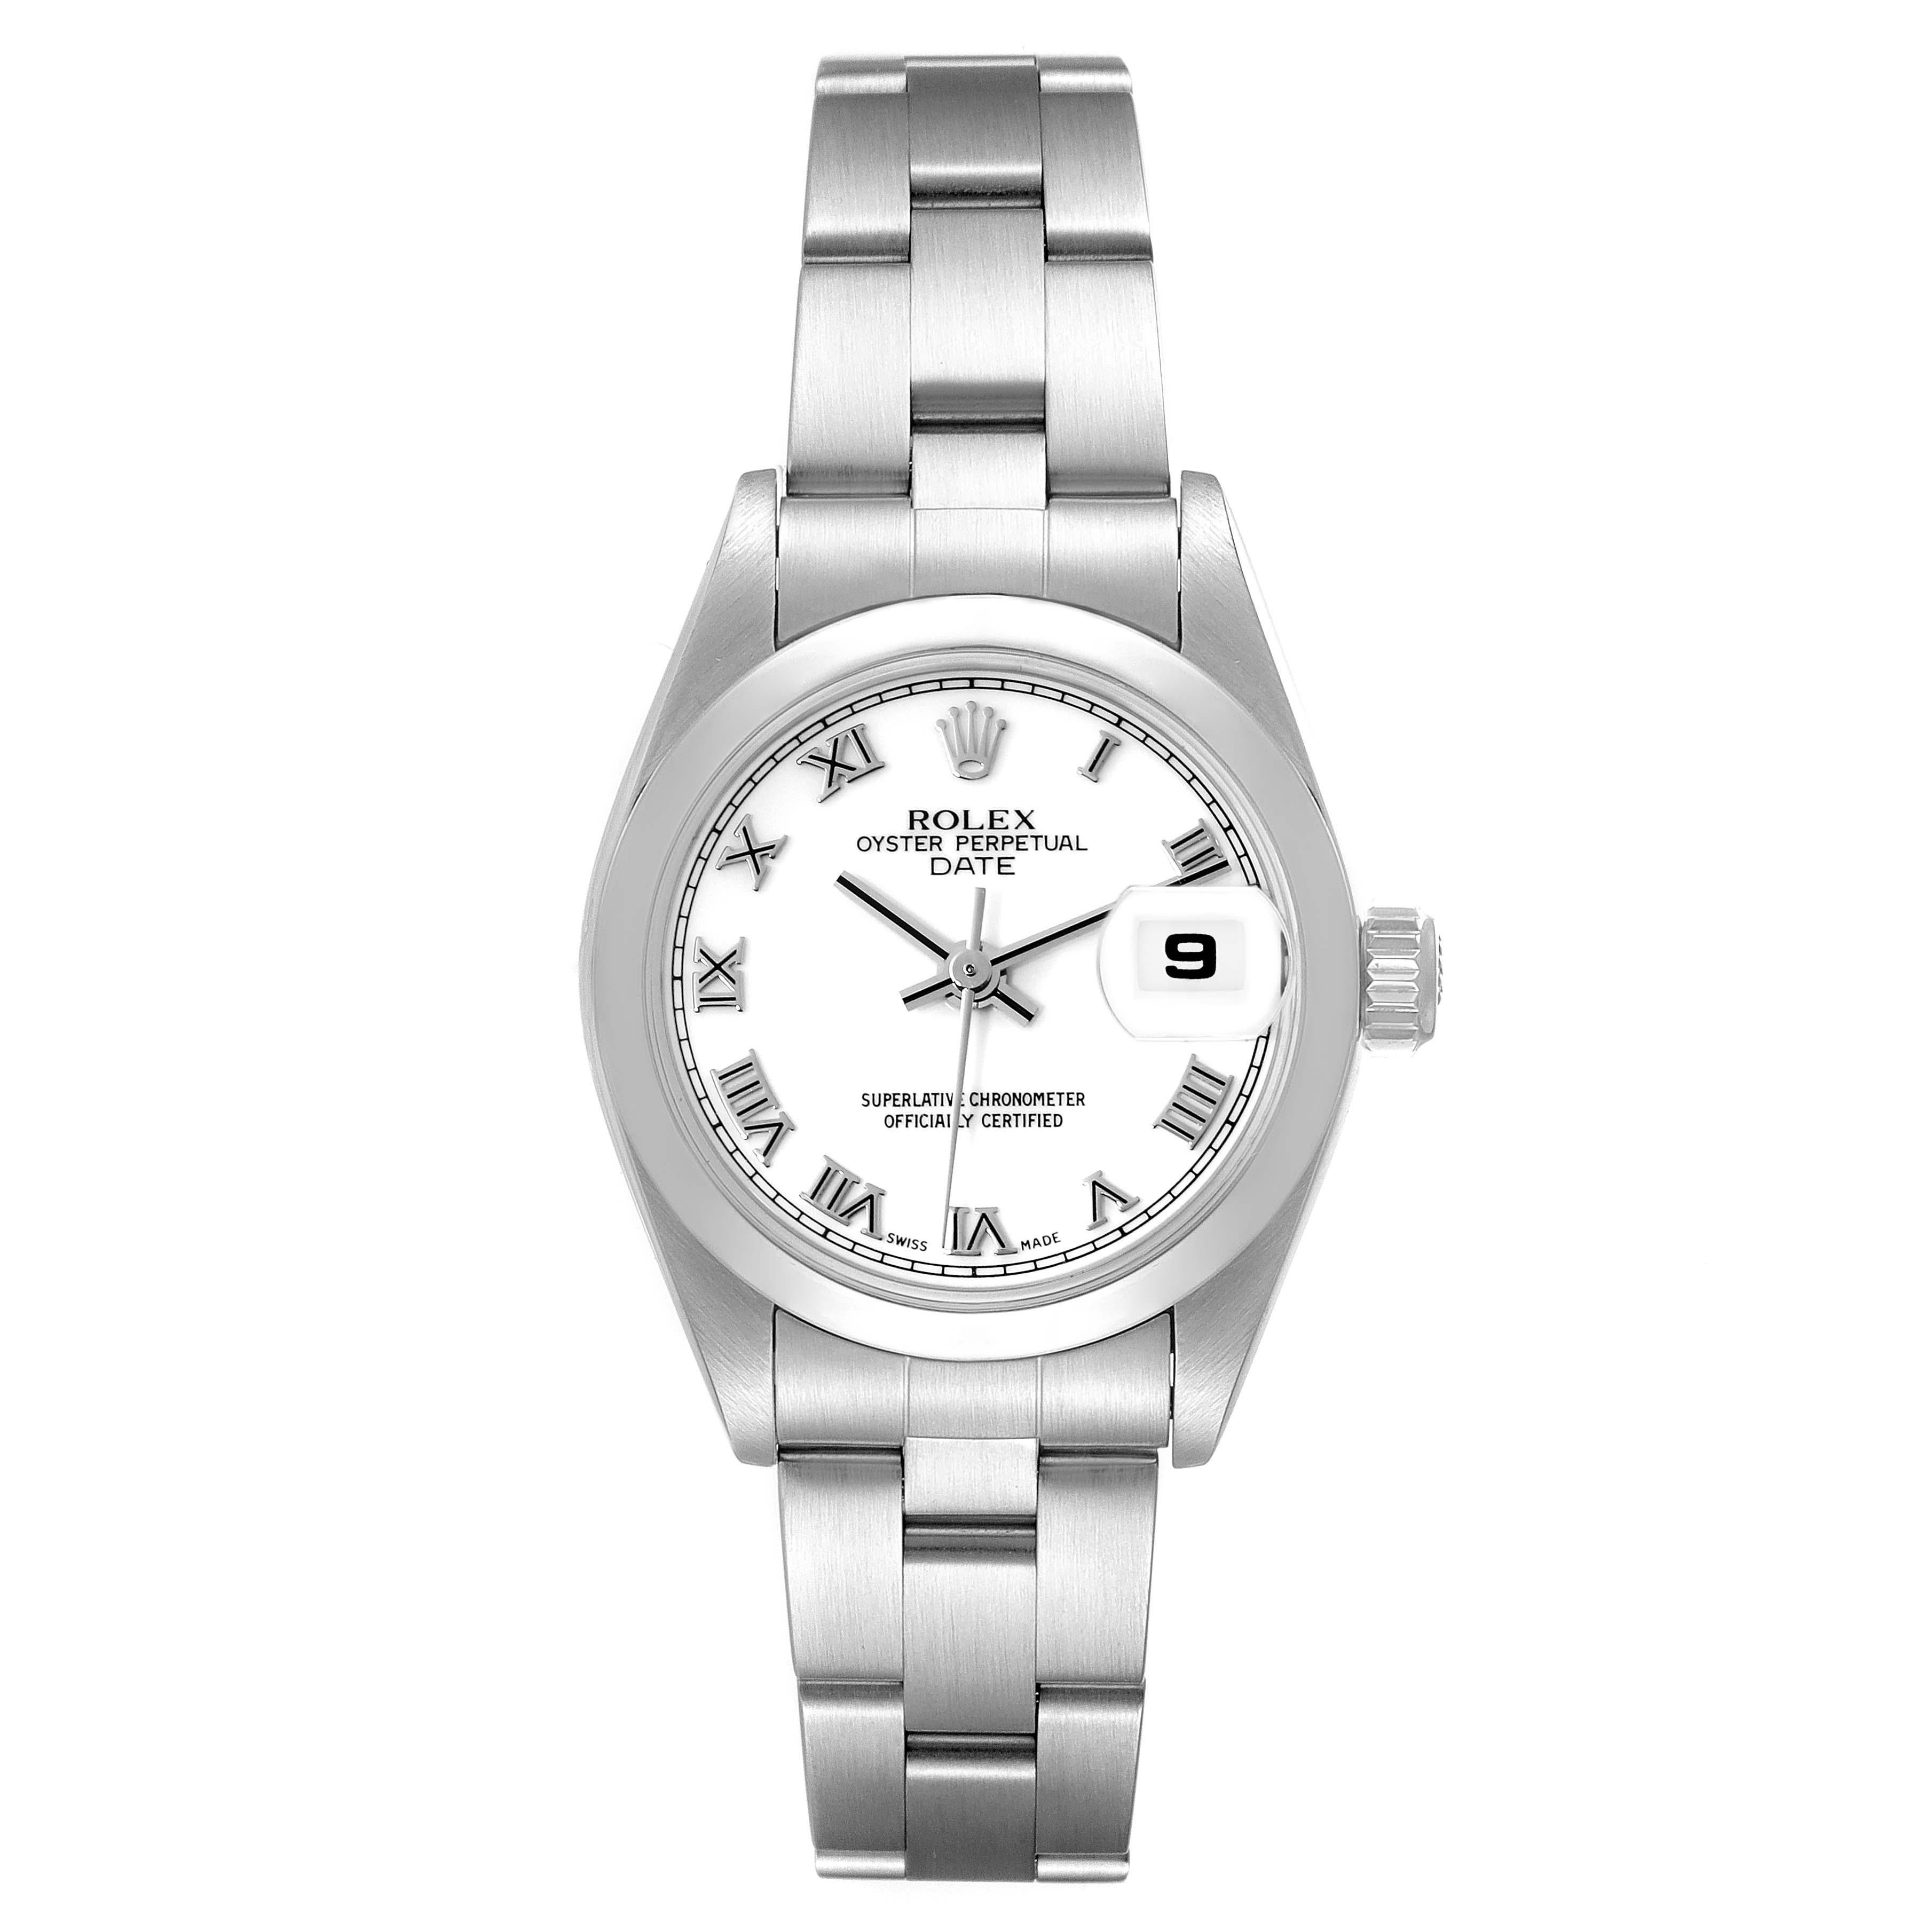 Rolex Date White Roman Dial Domed Bezel Steel Ladies Watch 79160. Officially certified chronometer automatic self-winding movement. Stainless steel oyster case 26 mm in diameter. Rolex logo on a crown. Stainless steel smooth bezel. Scratch resistant